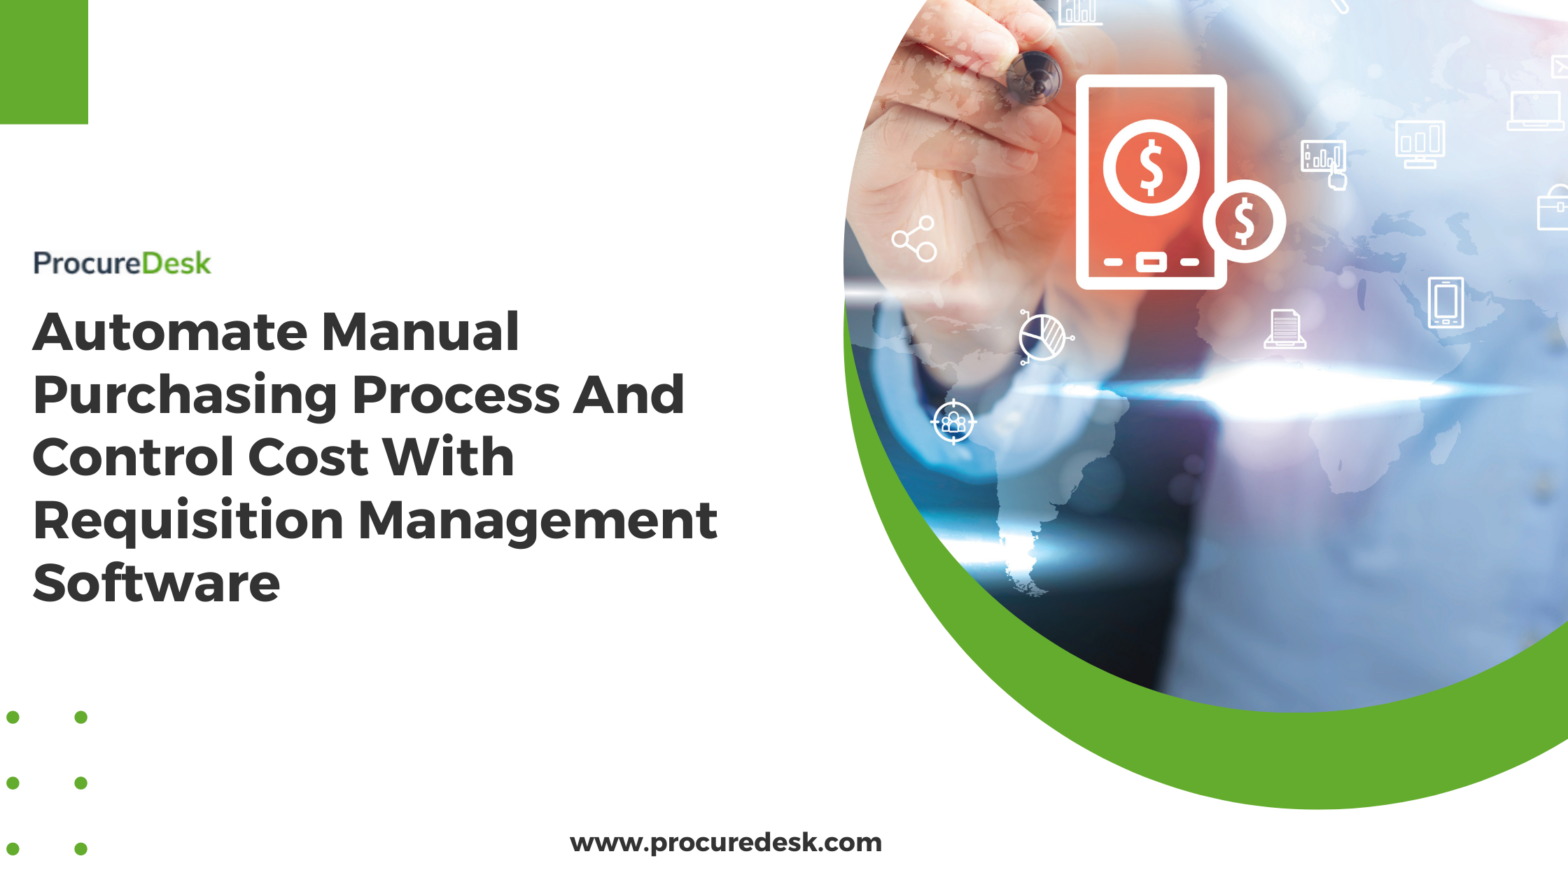 Automate Manual Purchasing Process and Control Costs with Requisition Management Software